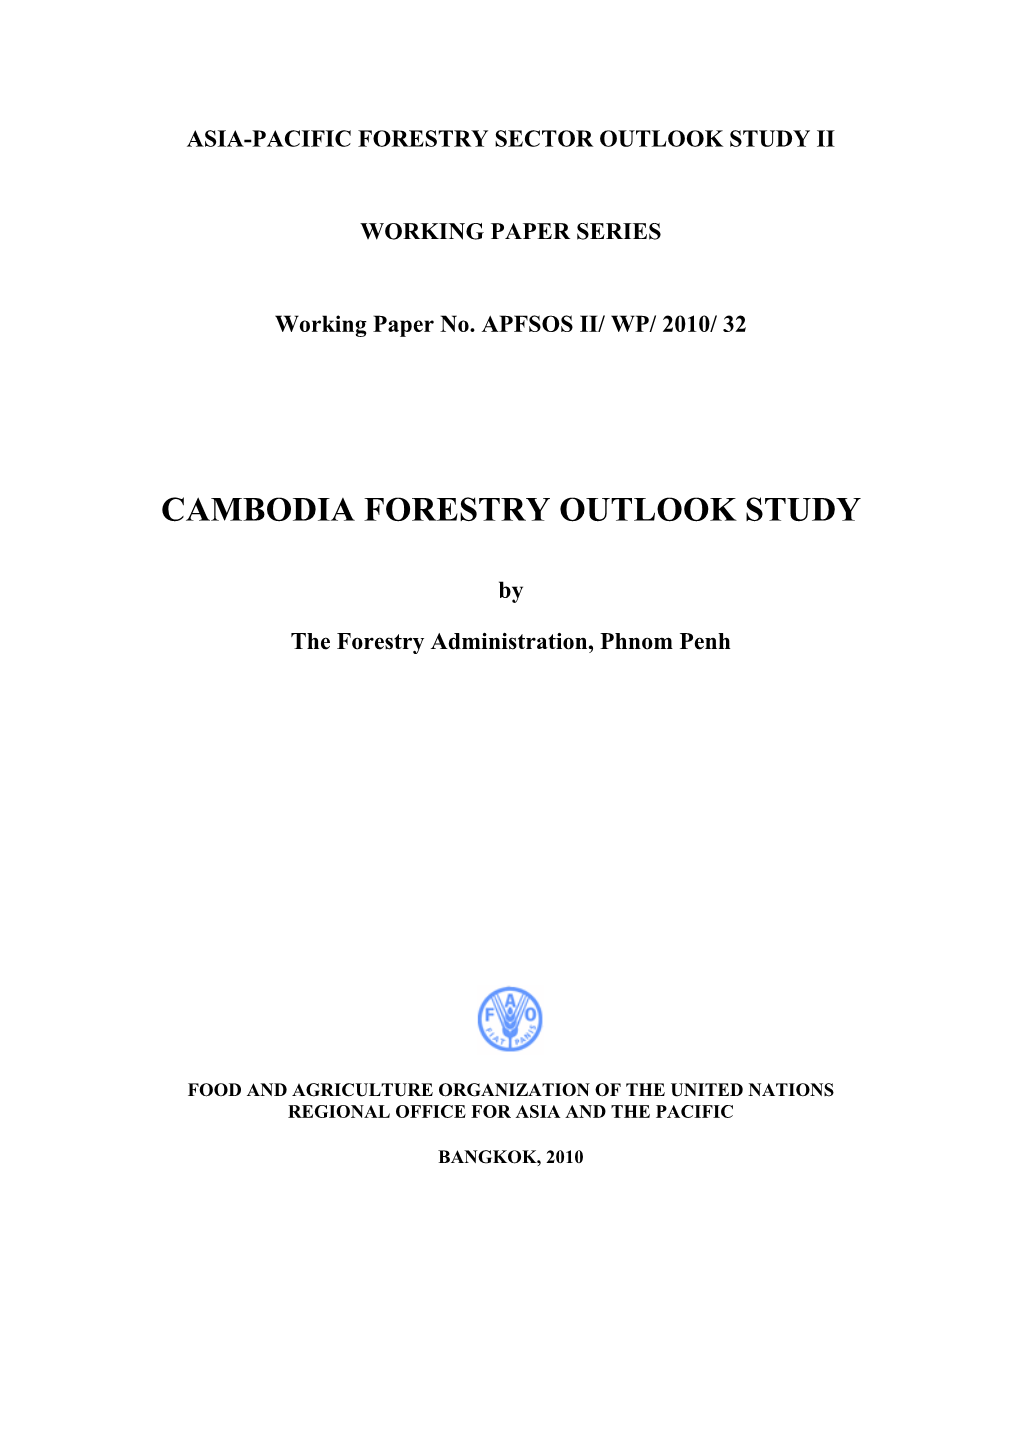 Cambodia Forestry Outlook Study